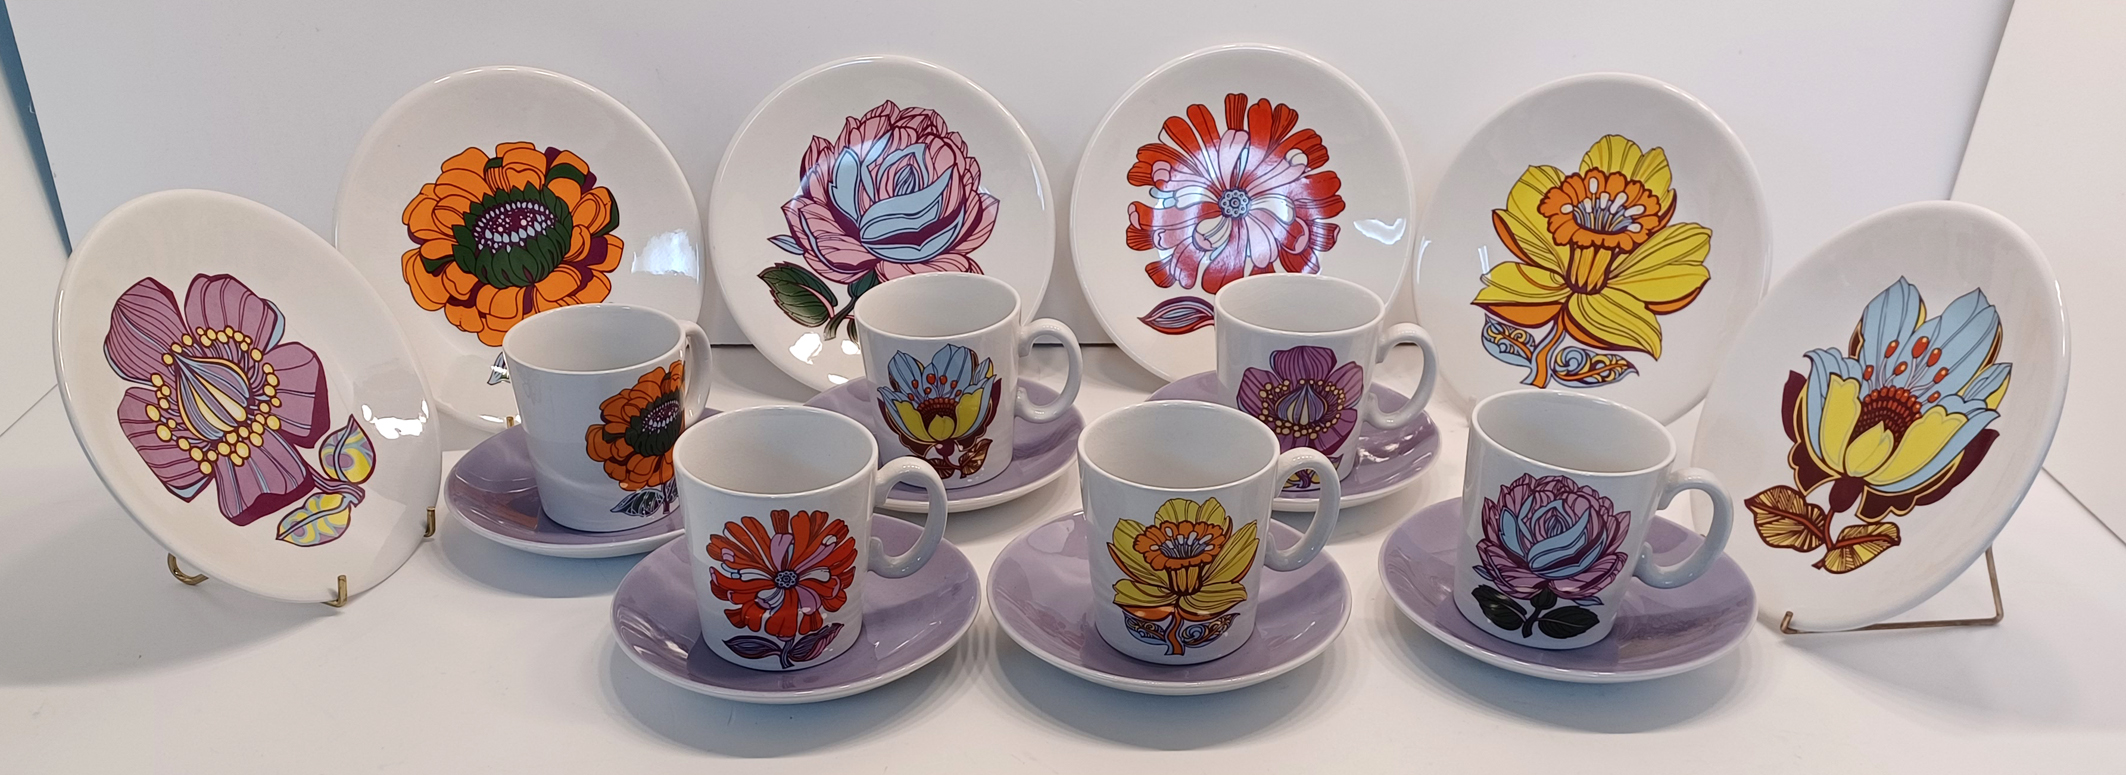 WASHINGTON FLOWER POWER POTTERY SIX CUPS, SAUCERS AND SIDE PLATES